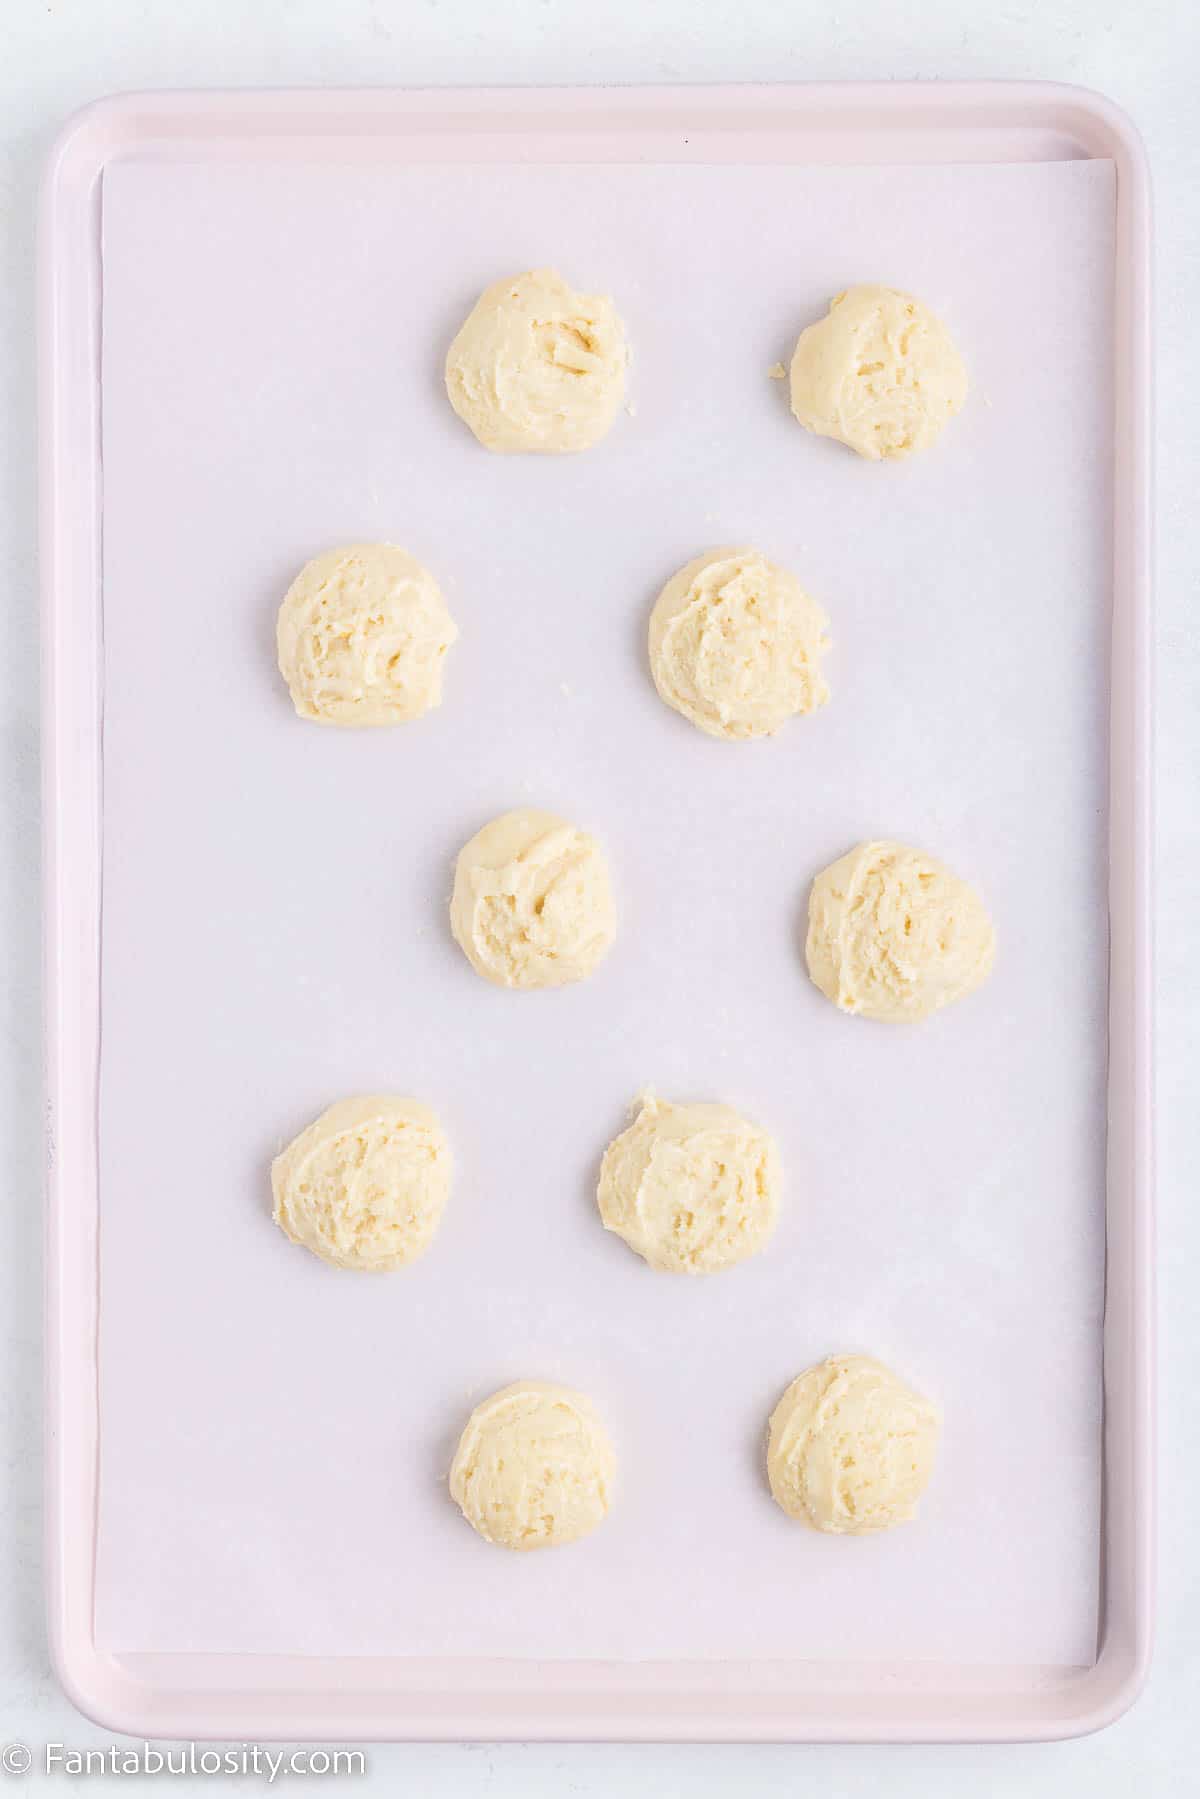 Raw cookie dough on baking sheet for bunny cookies.